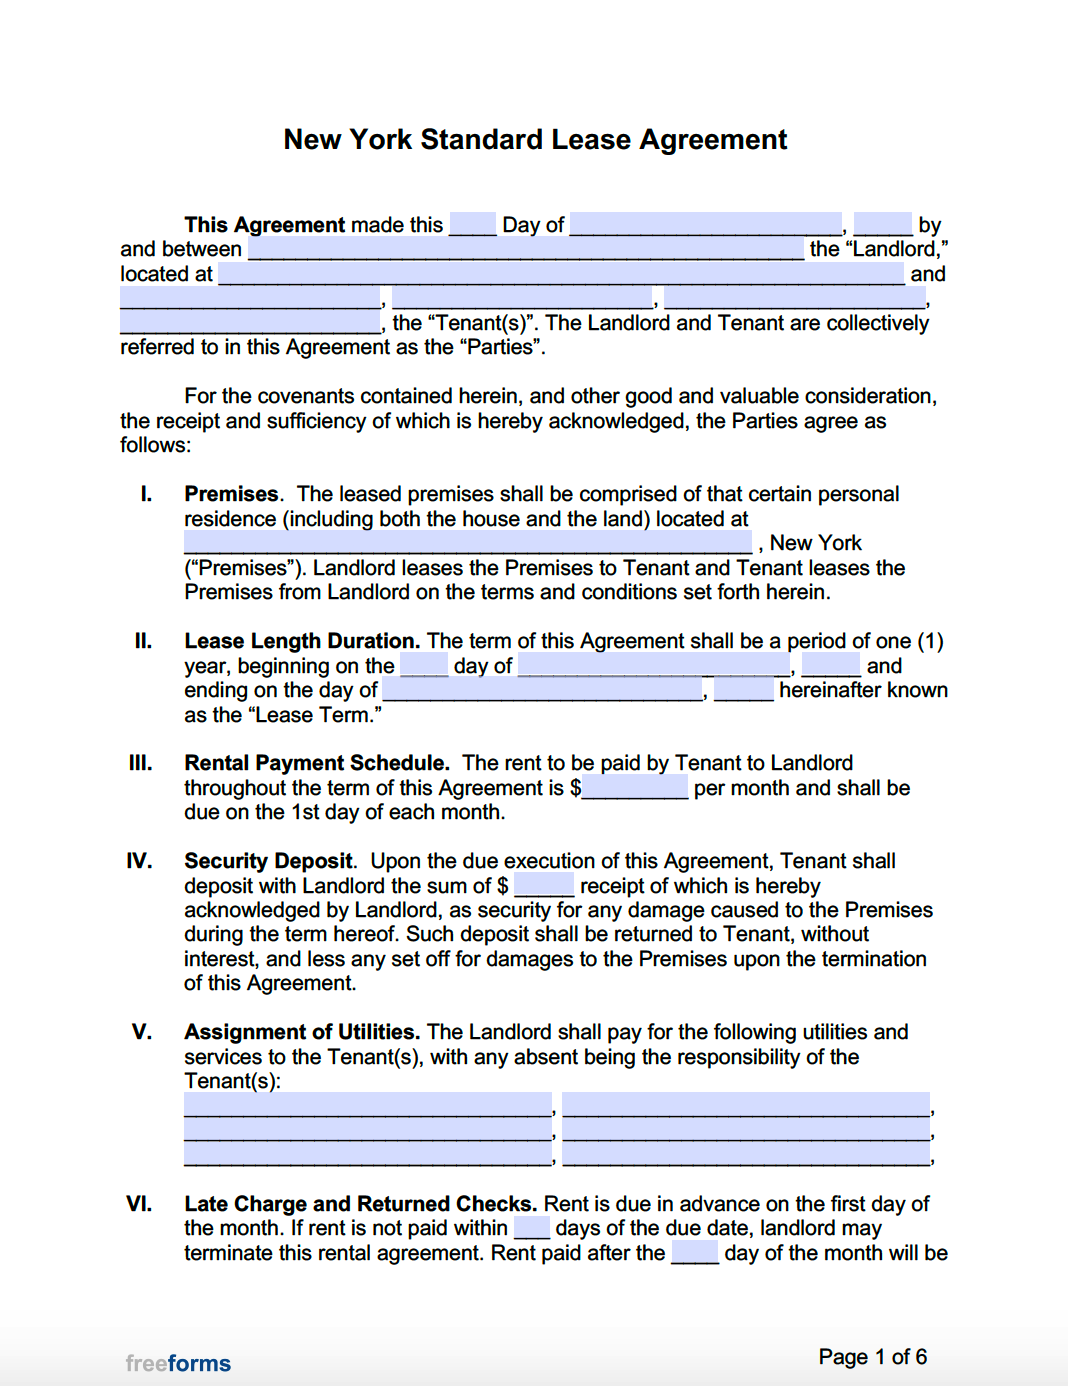 Free New York Standard Residential Lease Agreement Template | PDF | WORD